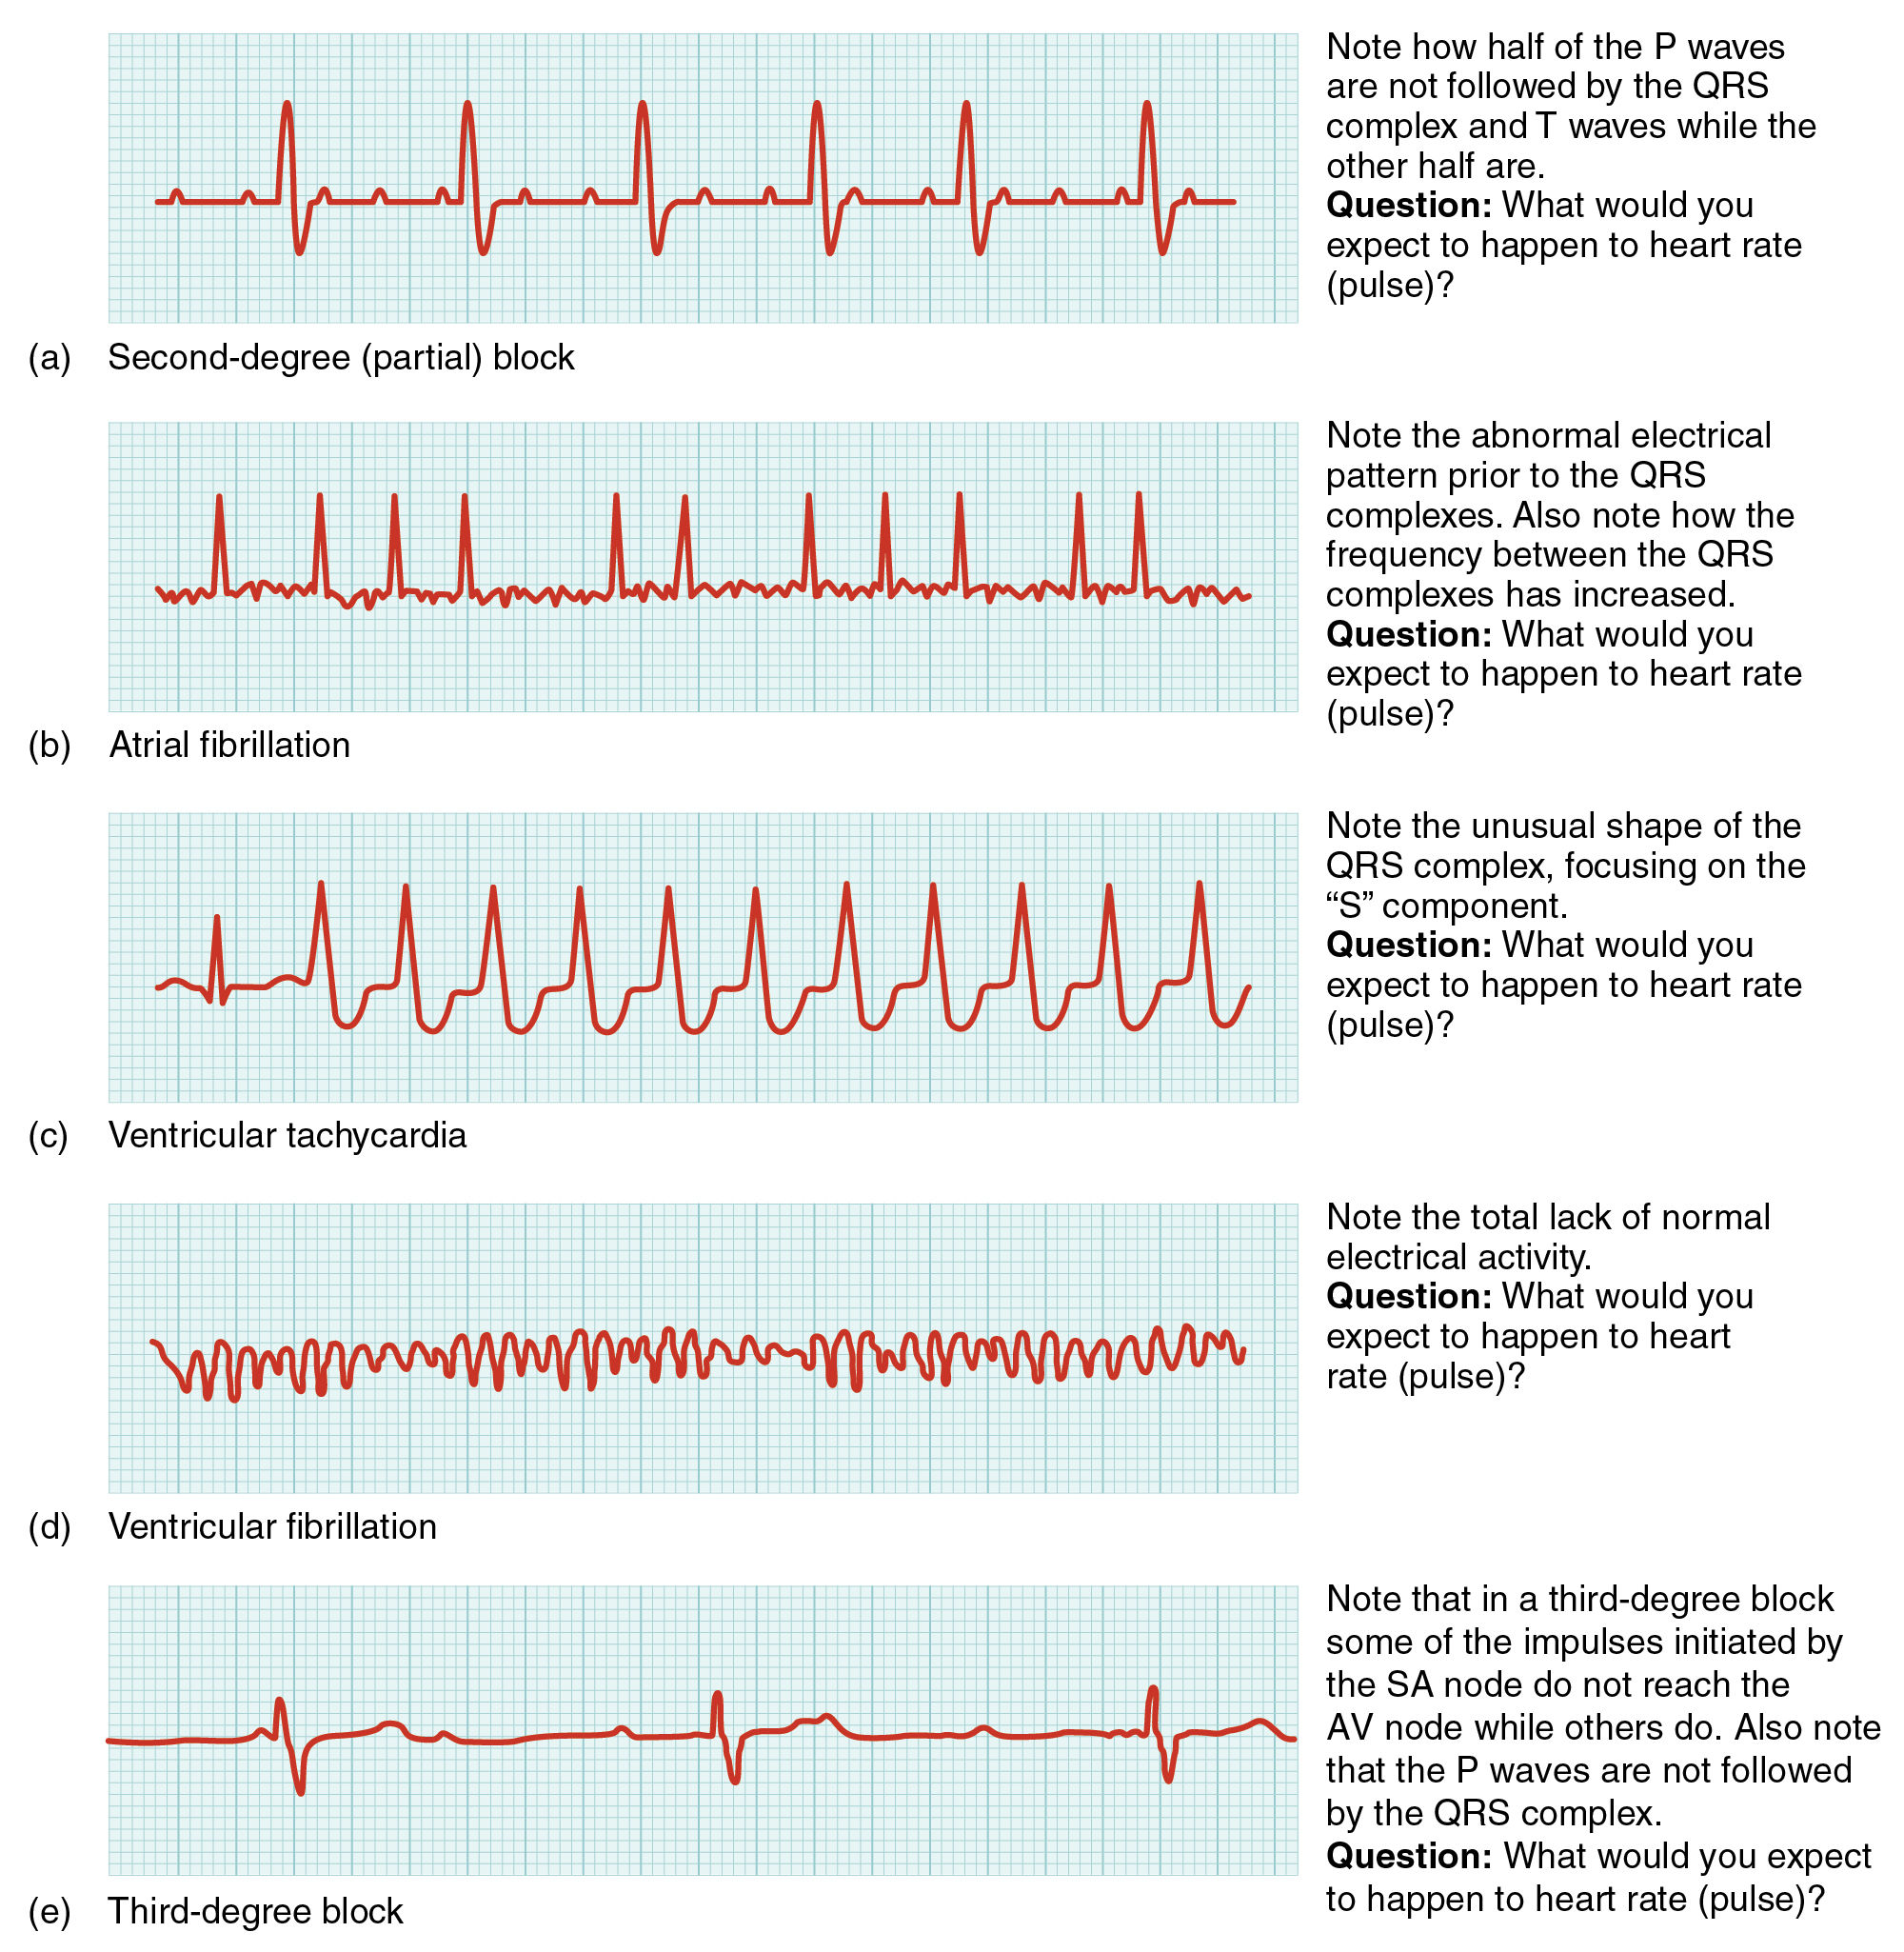 Illustrations showing comparisons of common ECG abnormalities